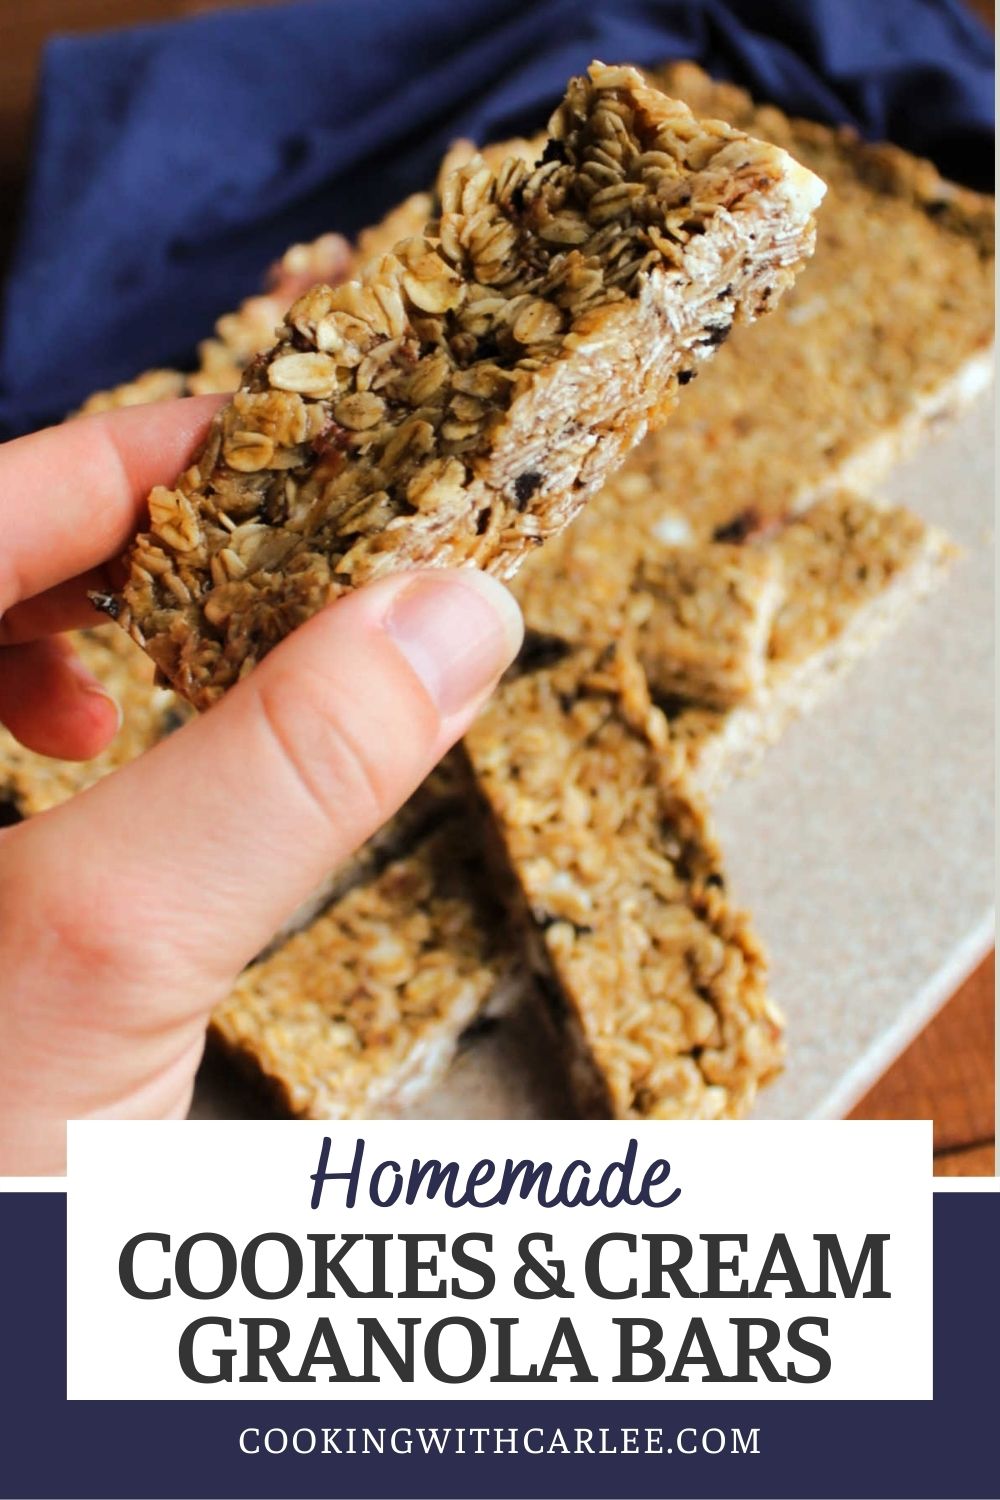 Homemade cookies and cream granola bars are quick and easy to make and you can control what goes in them. They are perfect for lunchbox treats, after school snacks or keep one or two in your purse for when hunger strikes.